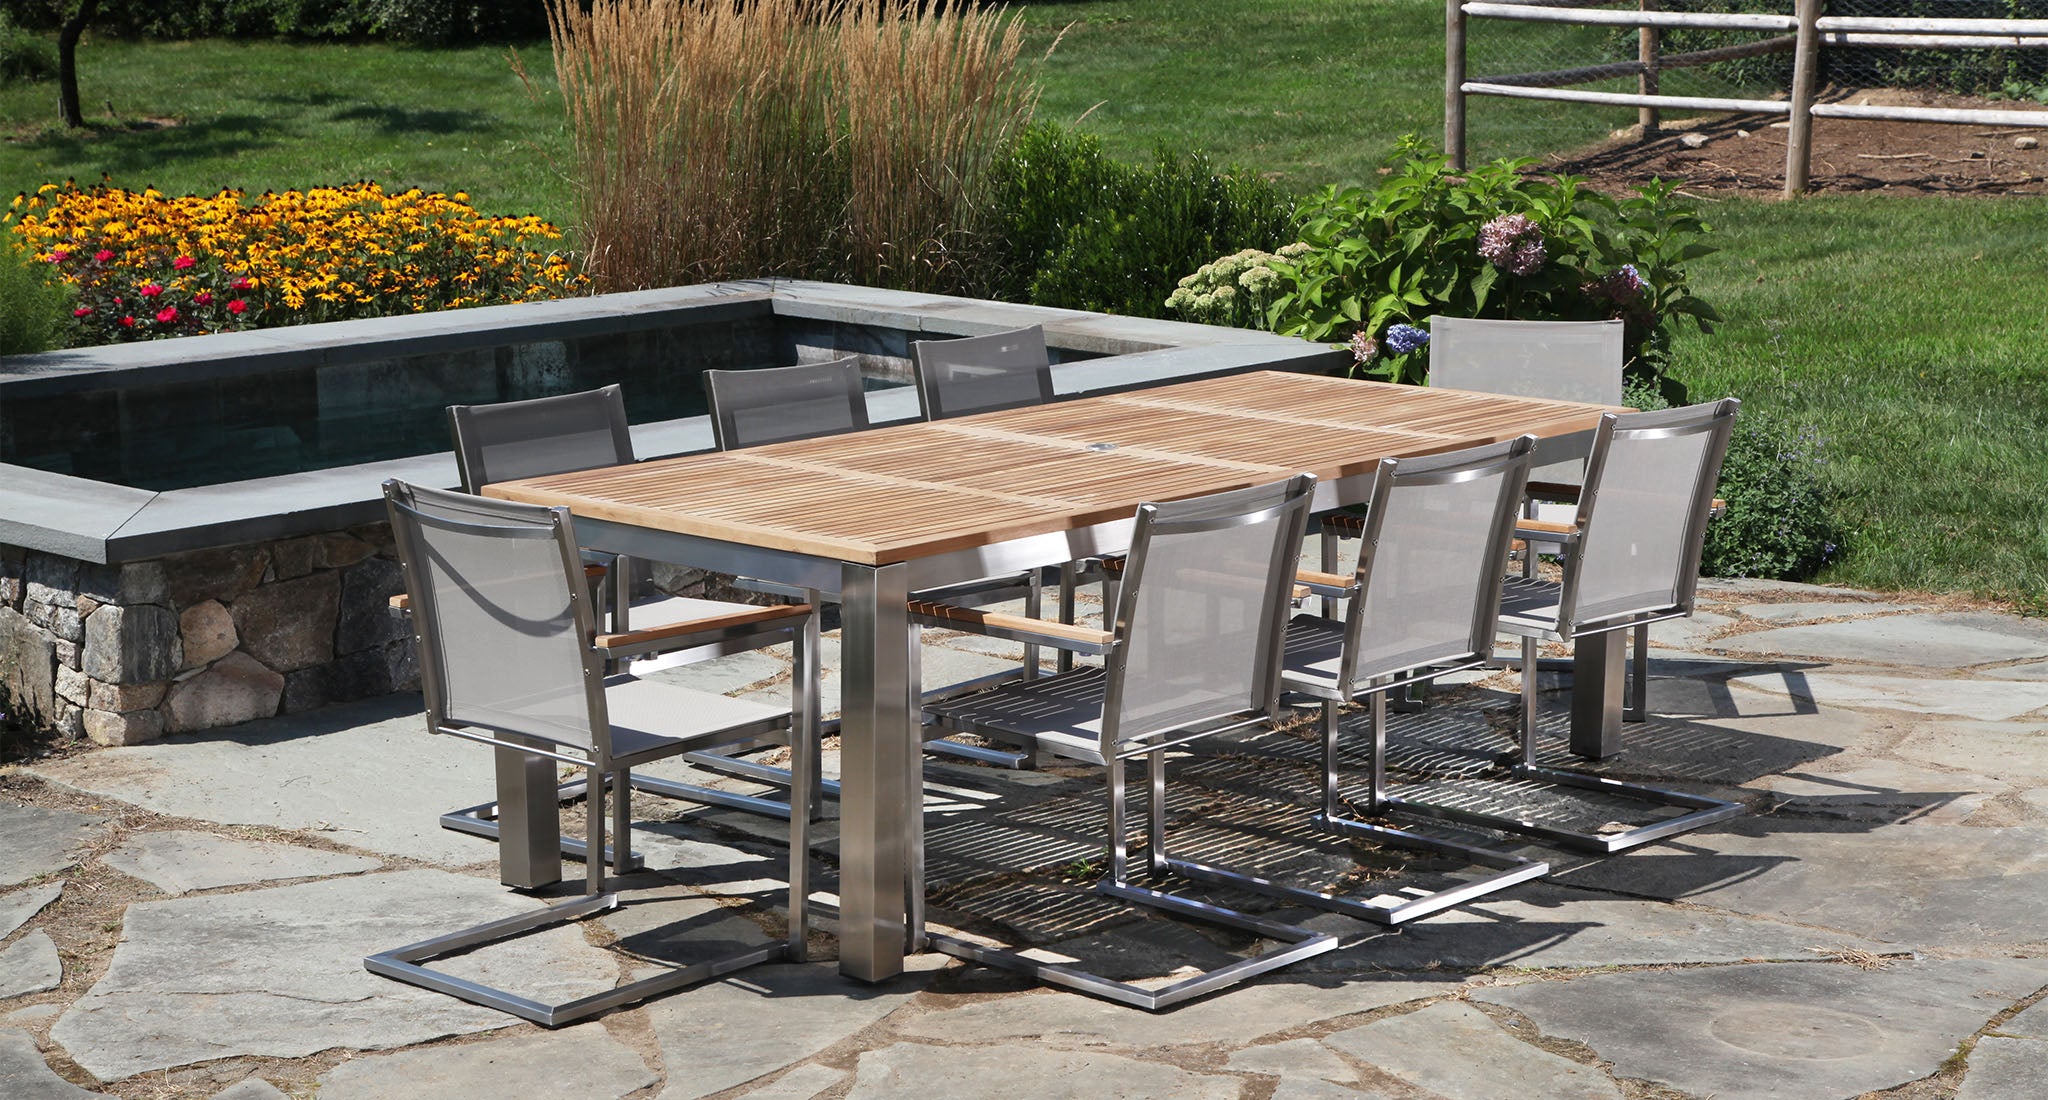 Bali outdoor dining set for 8 2